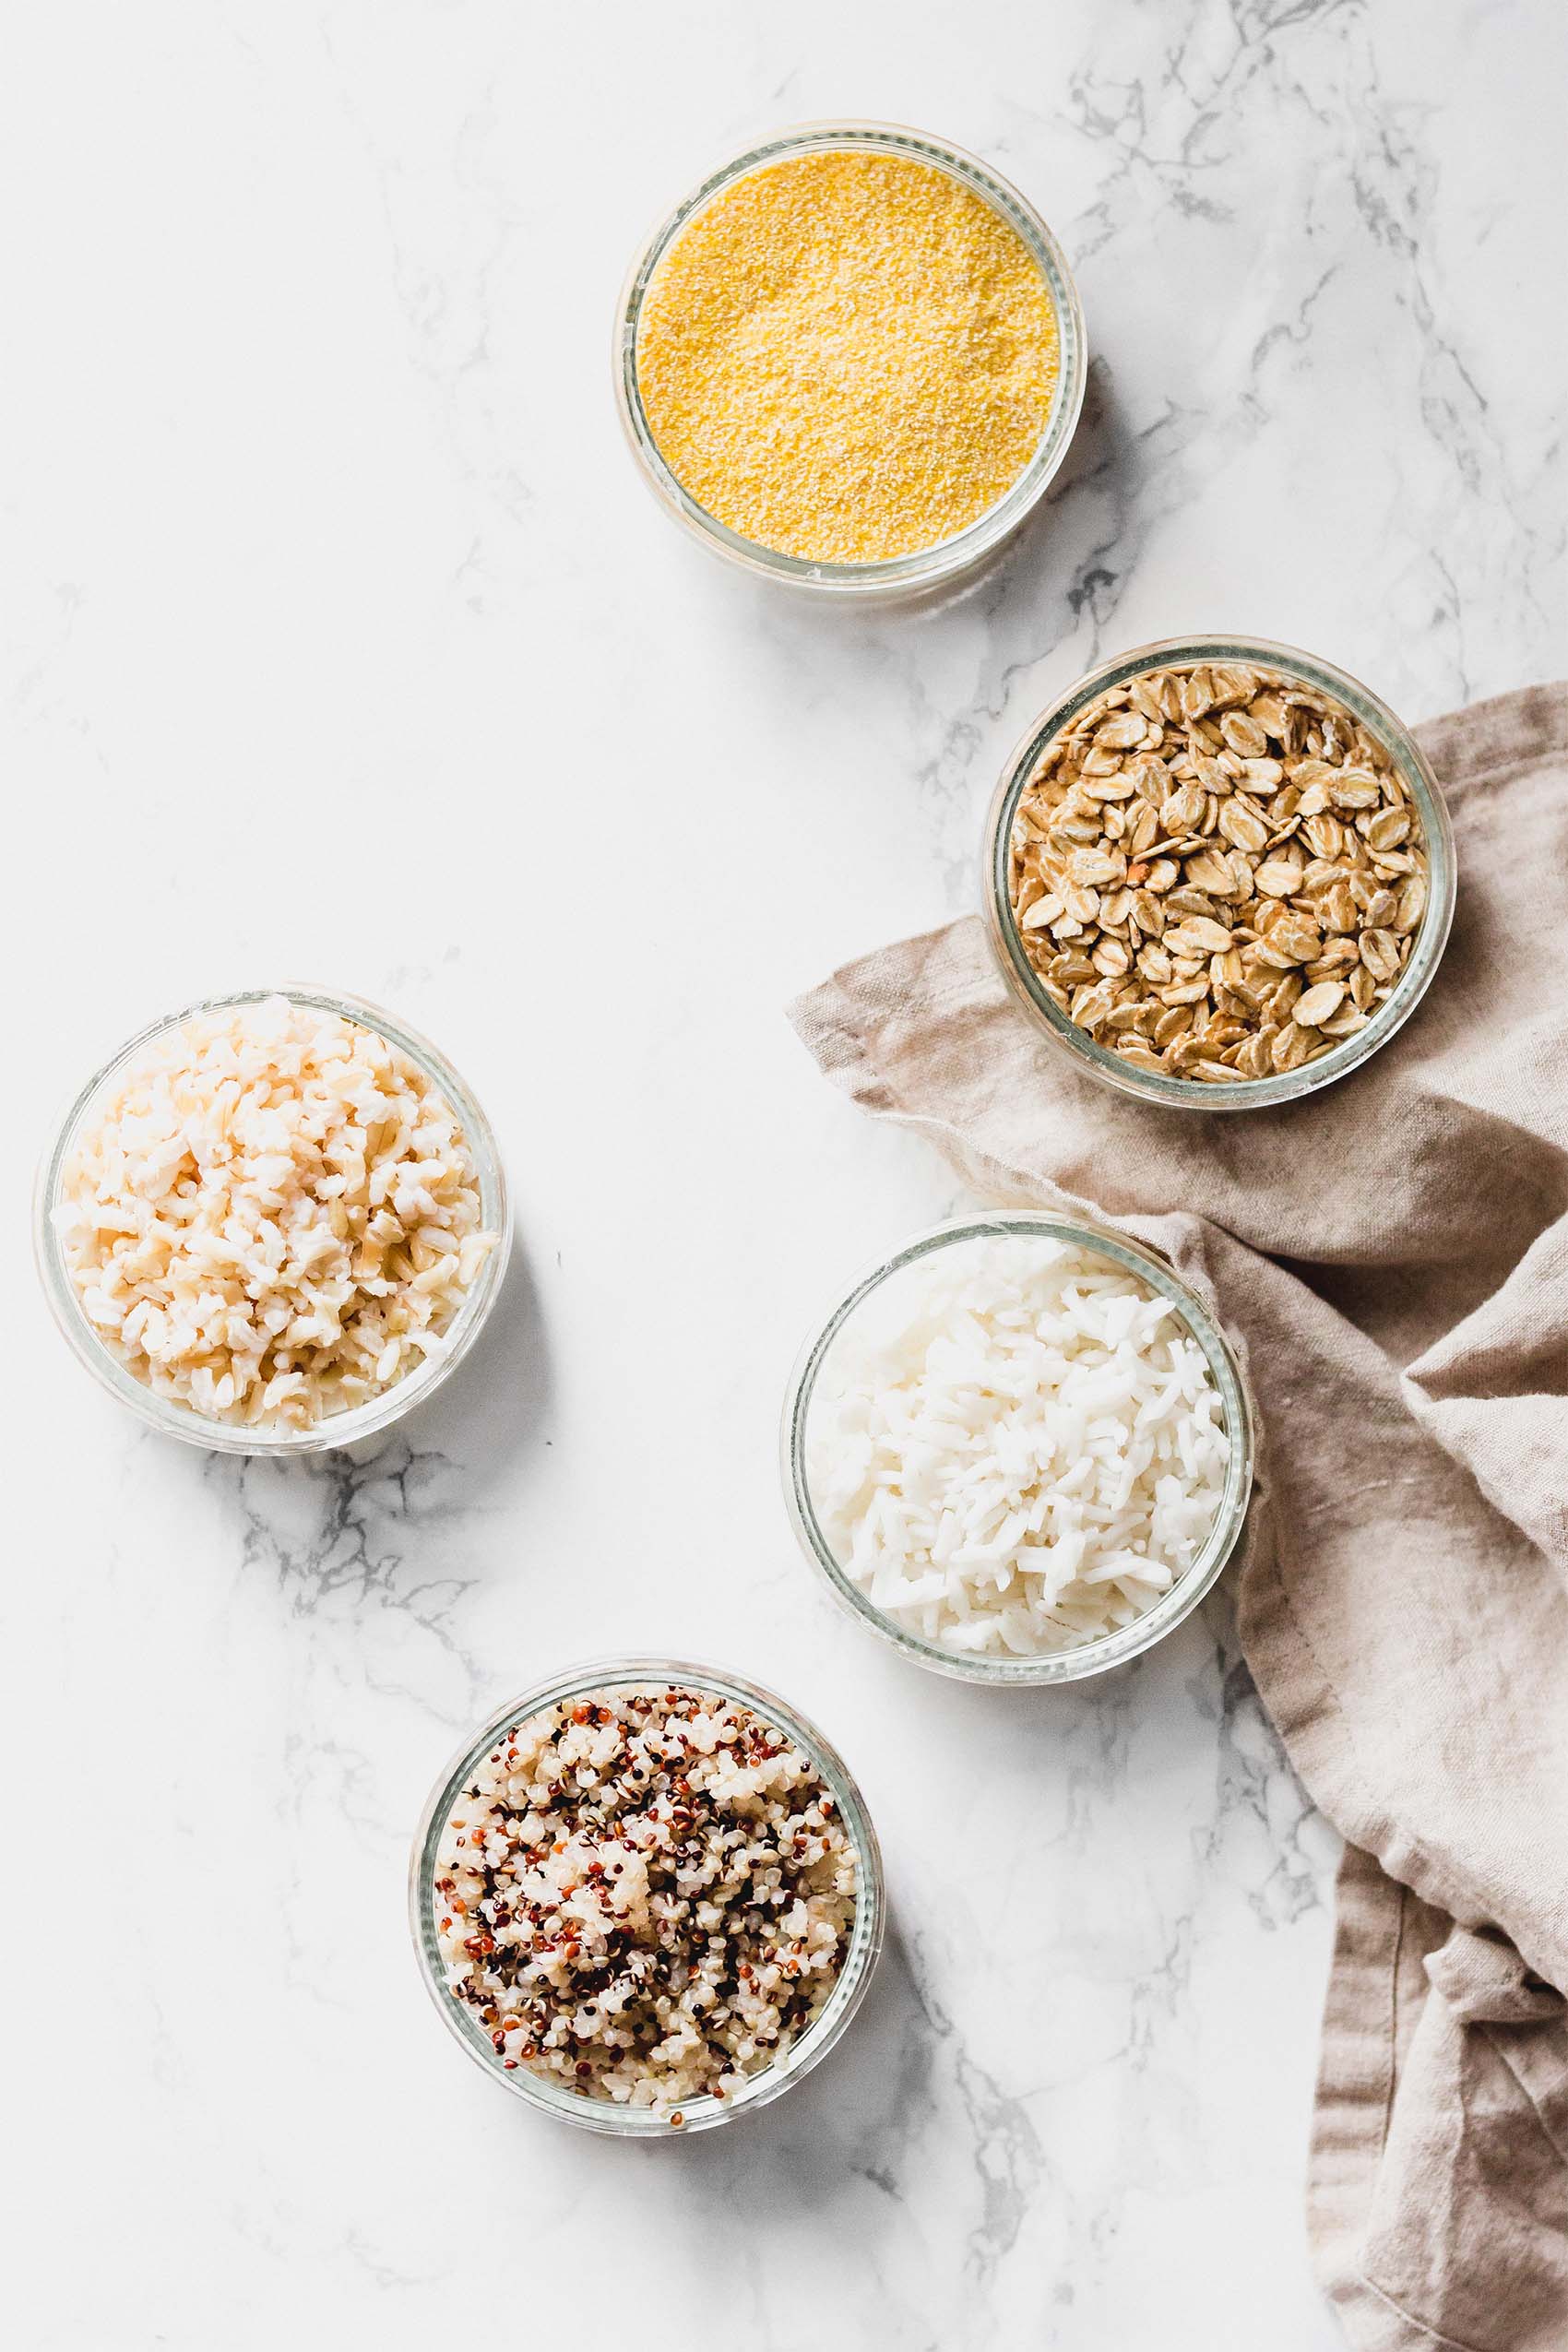 a collection of bowls of grains such as rice, quinoa and oats